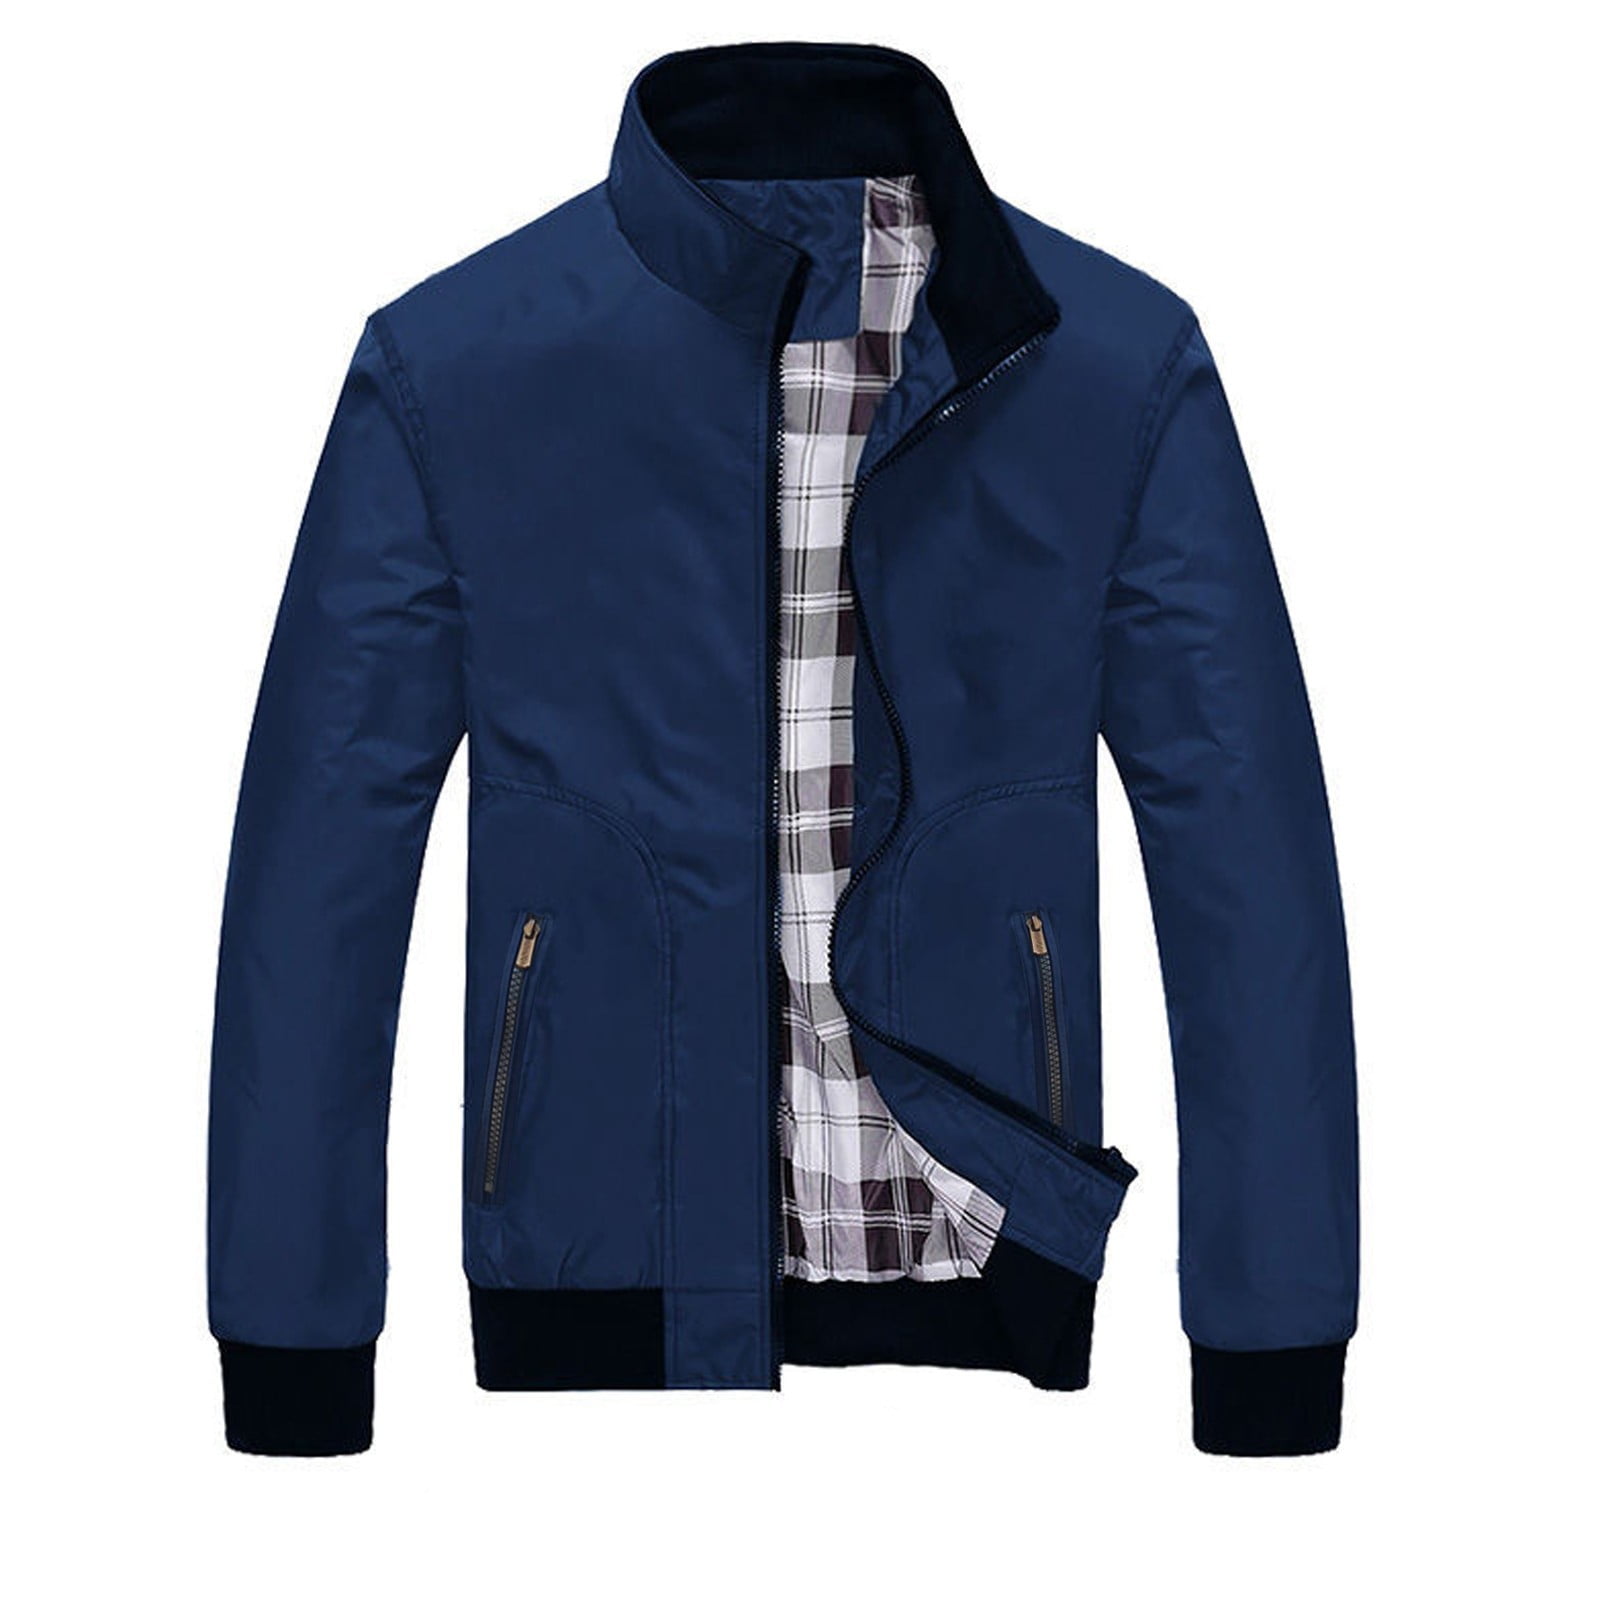 HBFAGFB Jackets for Men Lightweight and Casual Outdoor Sports Jacket ...